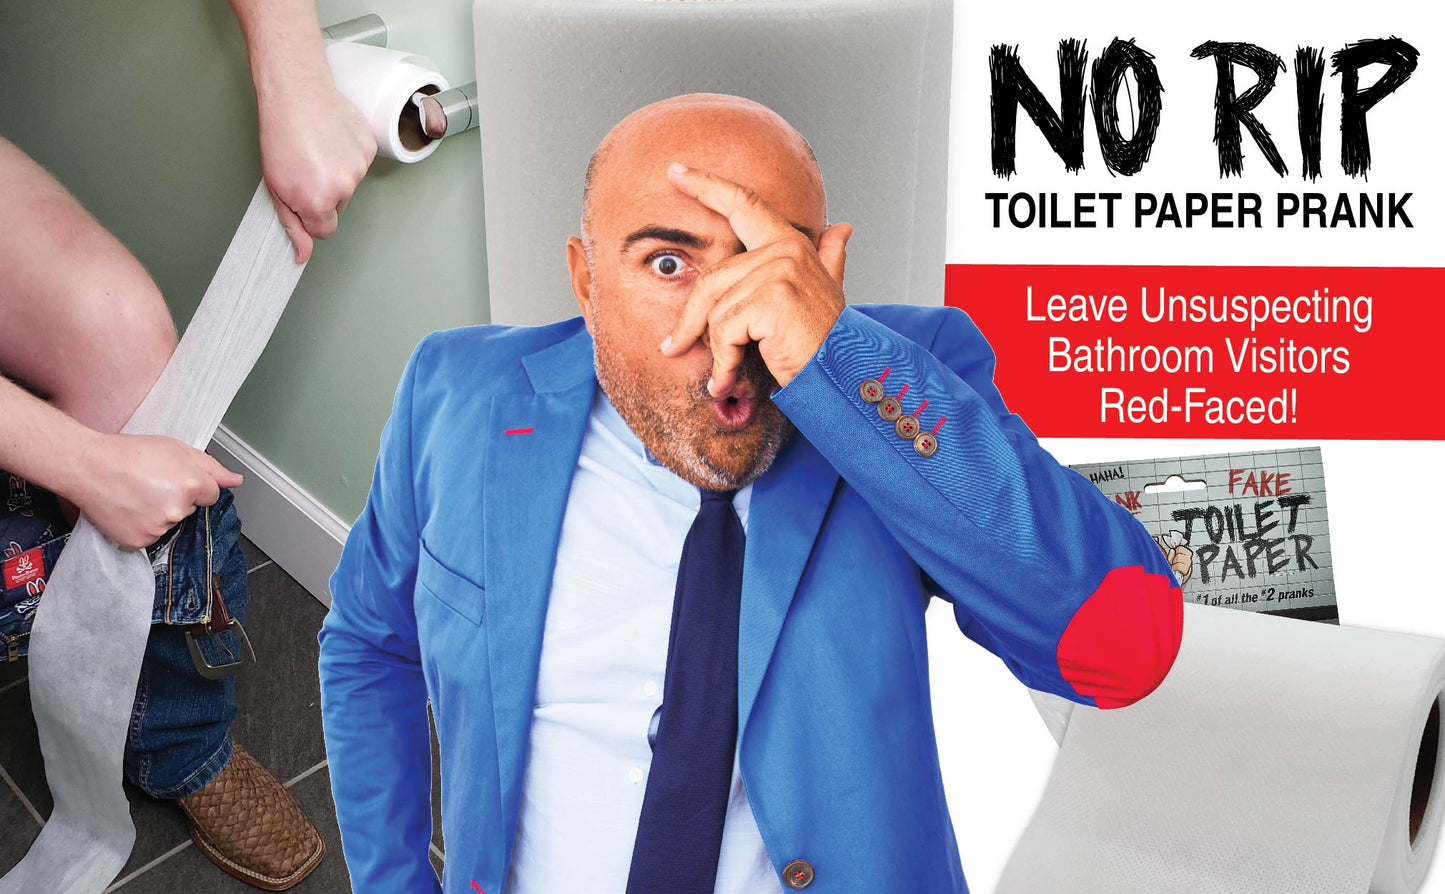 'No Tear' Funny Prank Toilet Paper - Impossible to Rip -Fake Novelty Stuff for Adults and Kids